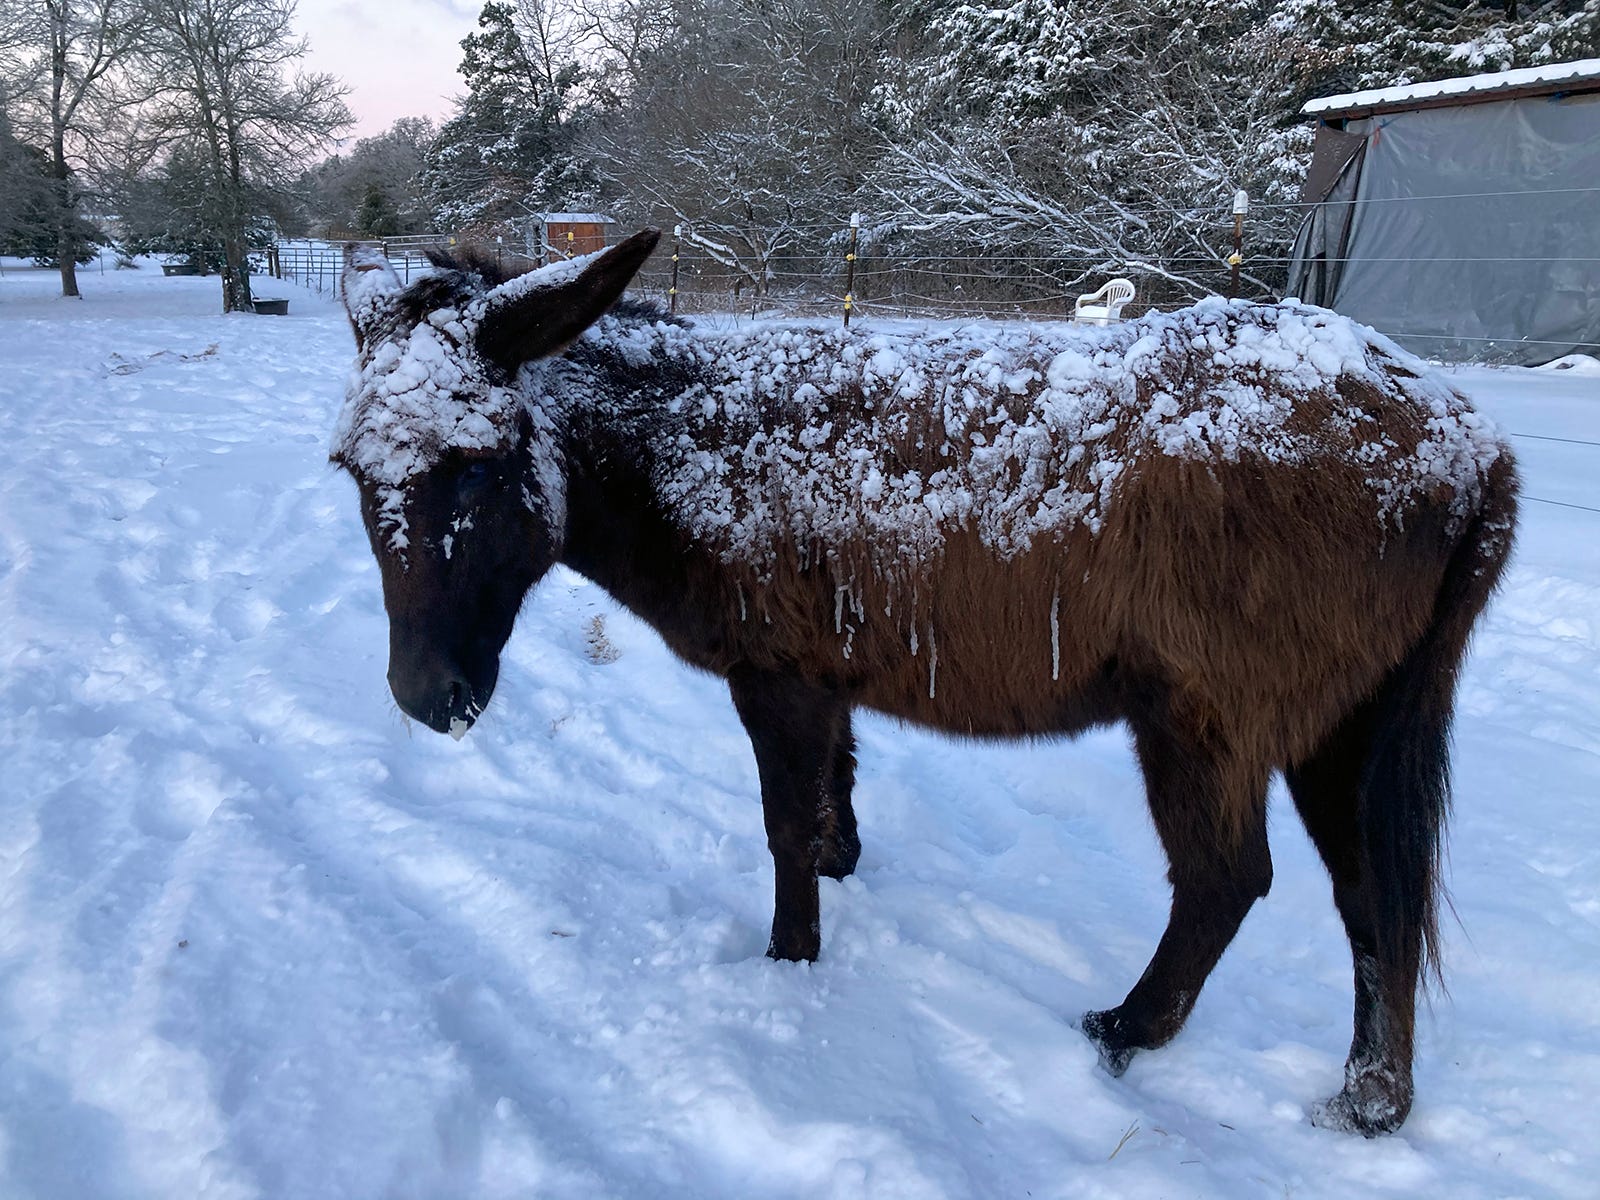 A donkey has icicles on his shaggy coat after winter weather hit Bastrop County. The area saw 4-6 inches of snow and temperatures below freezing.